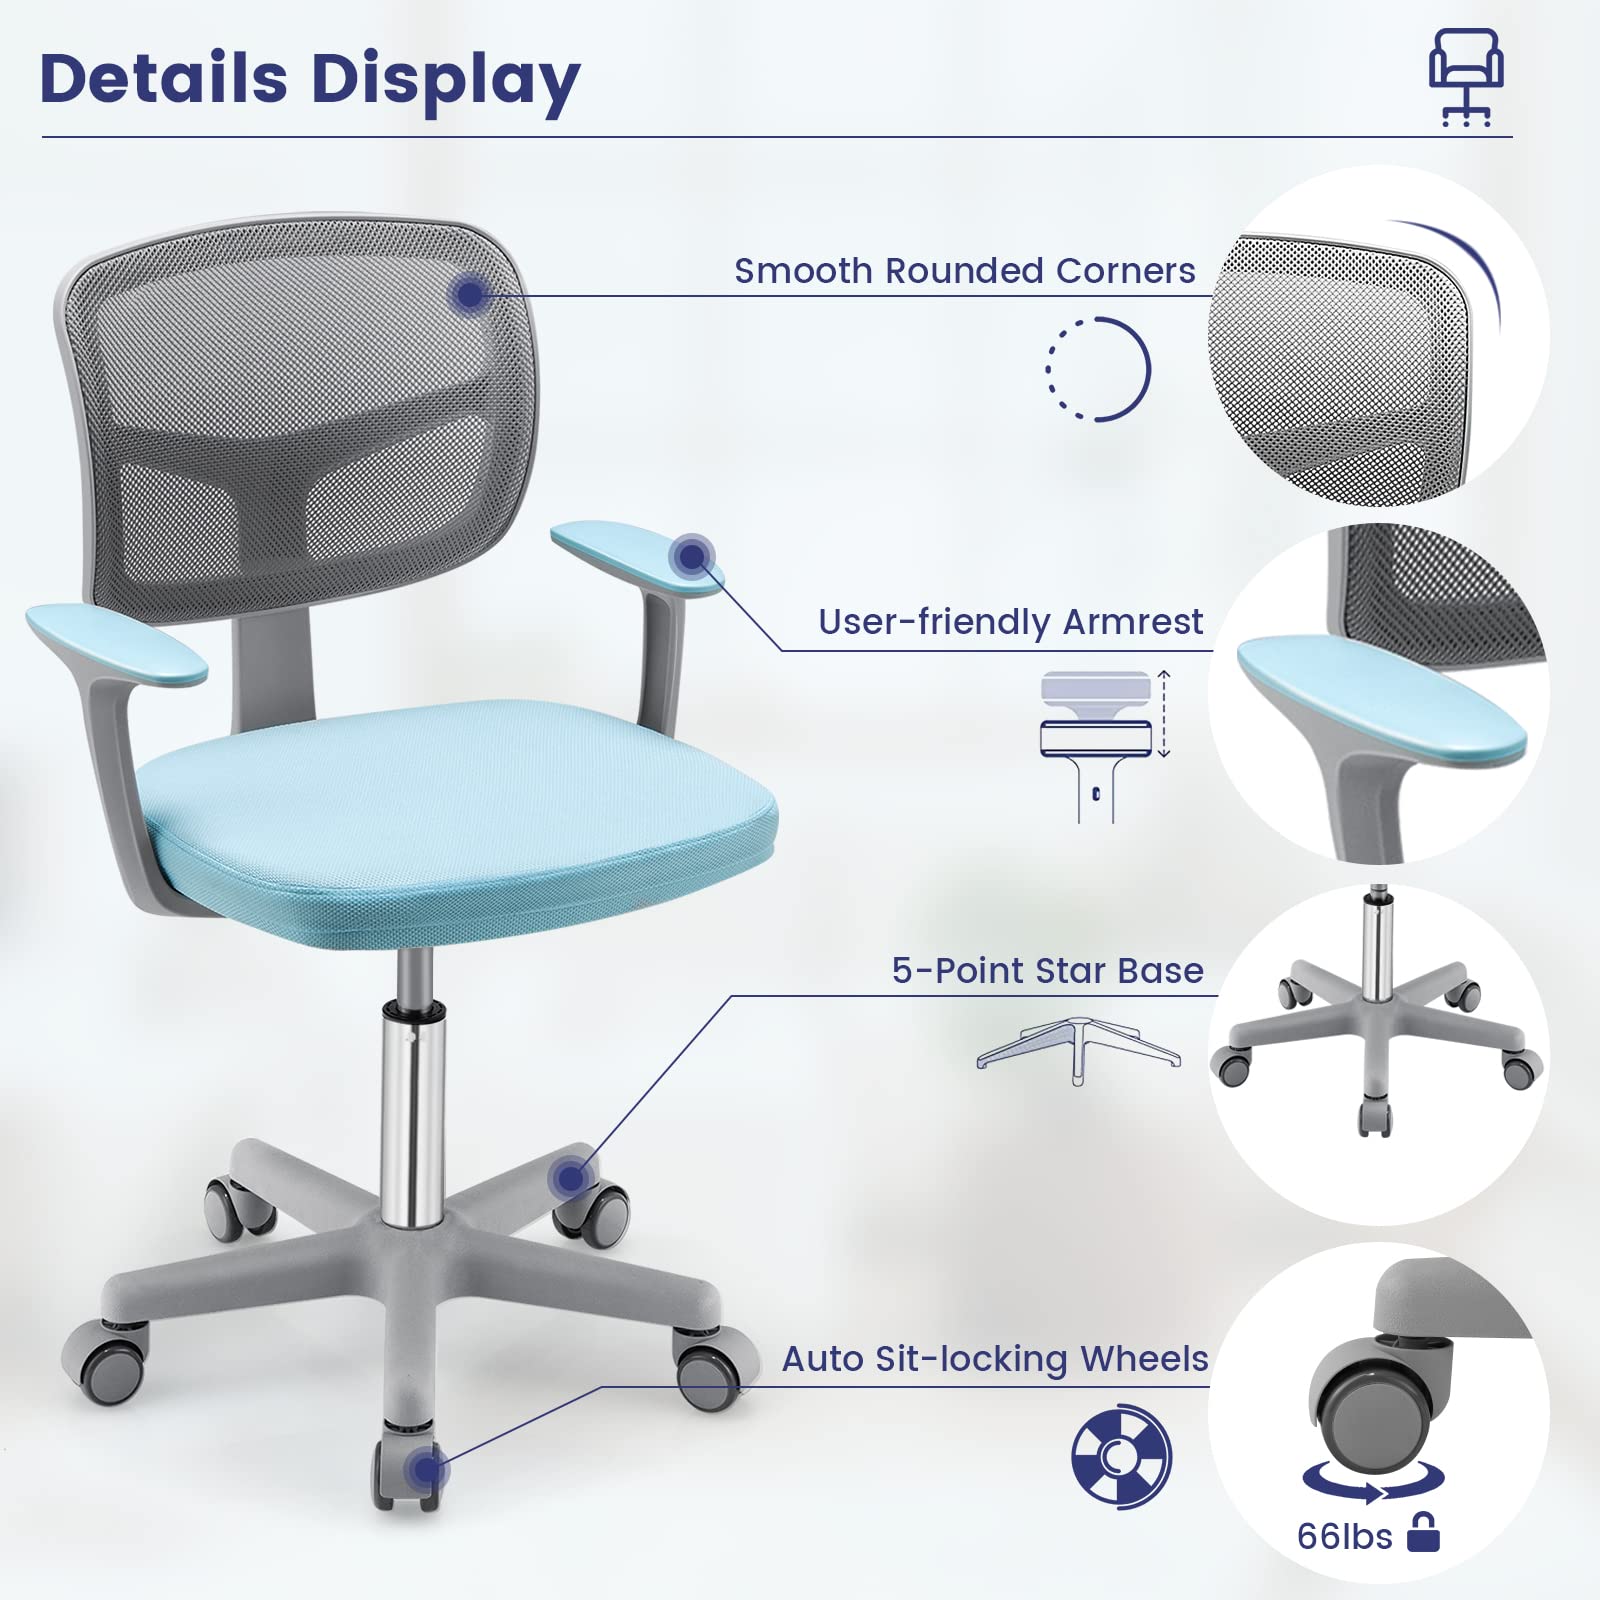 Giantex Ergonomic Home Office Chair, Mesh Low Back Desk Chair, Swivel Computer Chair with Y-Shaped Lumbar Support & Comfy Armrest